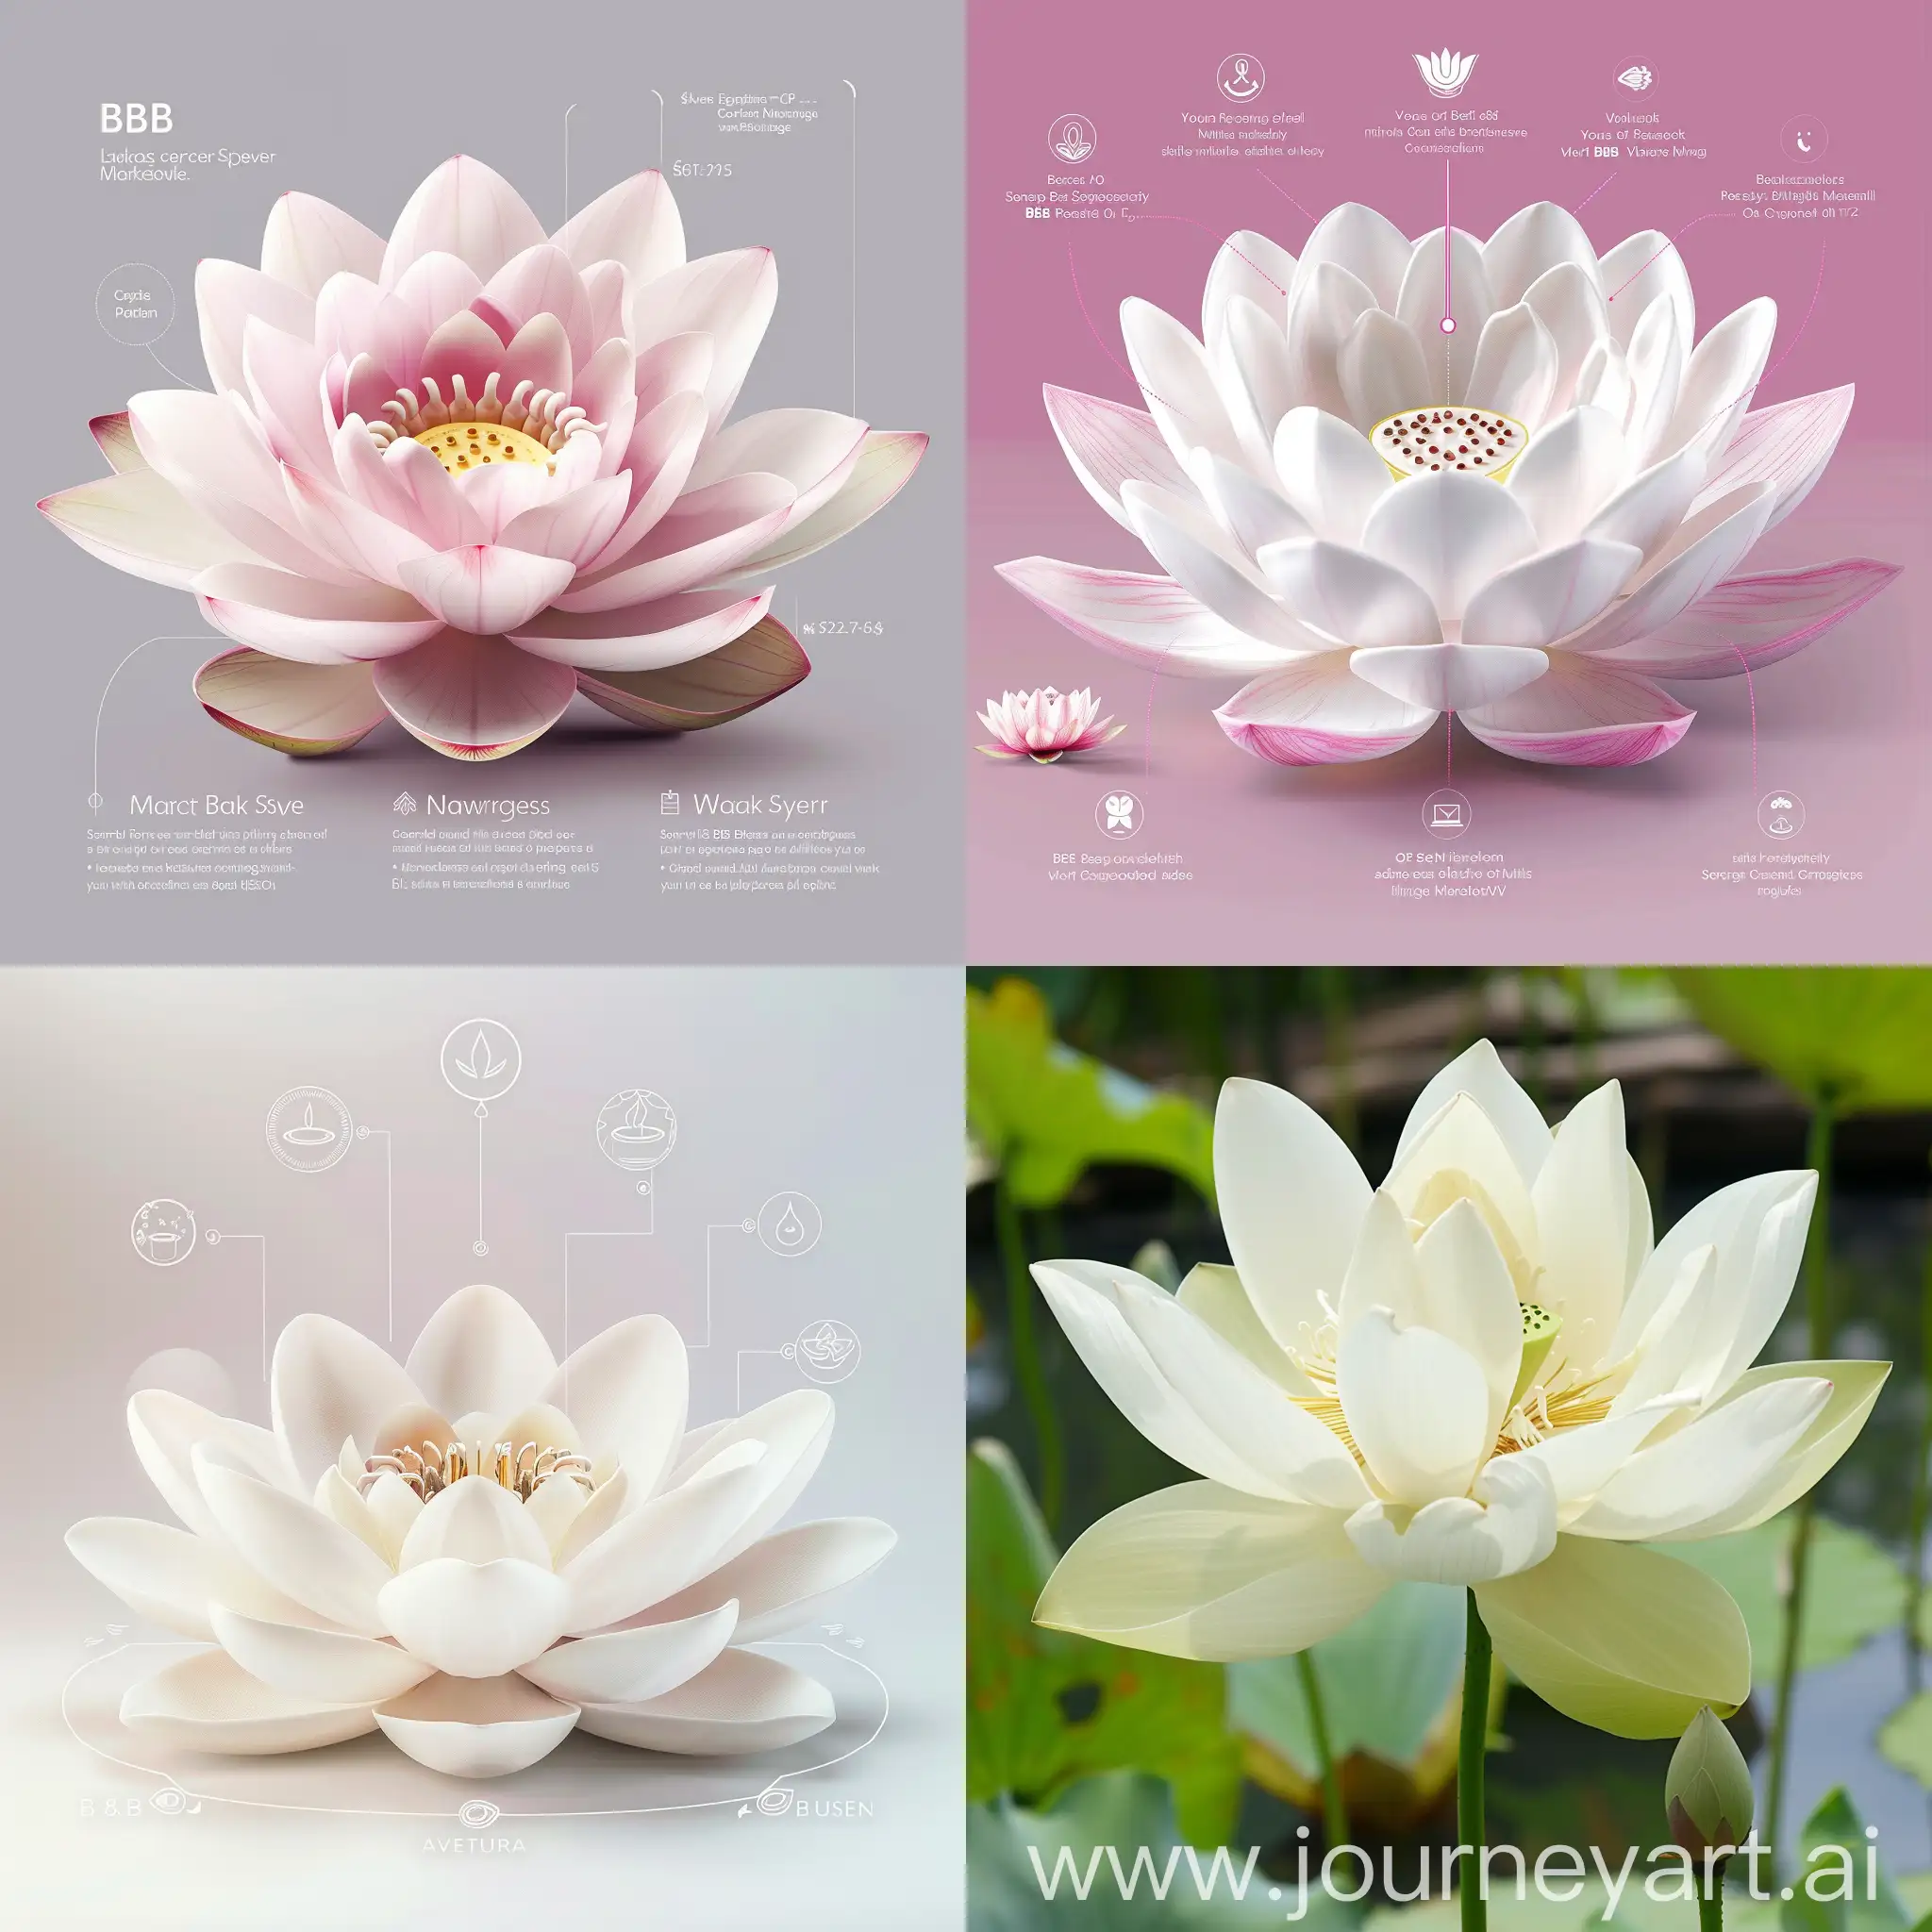 Lotus blossom with characteristics of B2B service, plumbing installation, and relations marketing